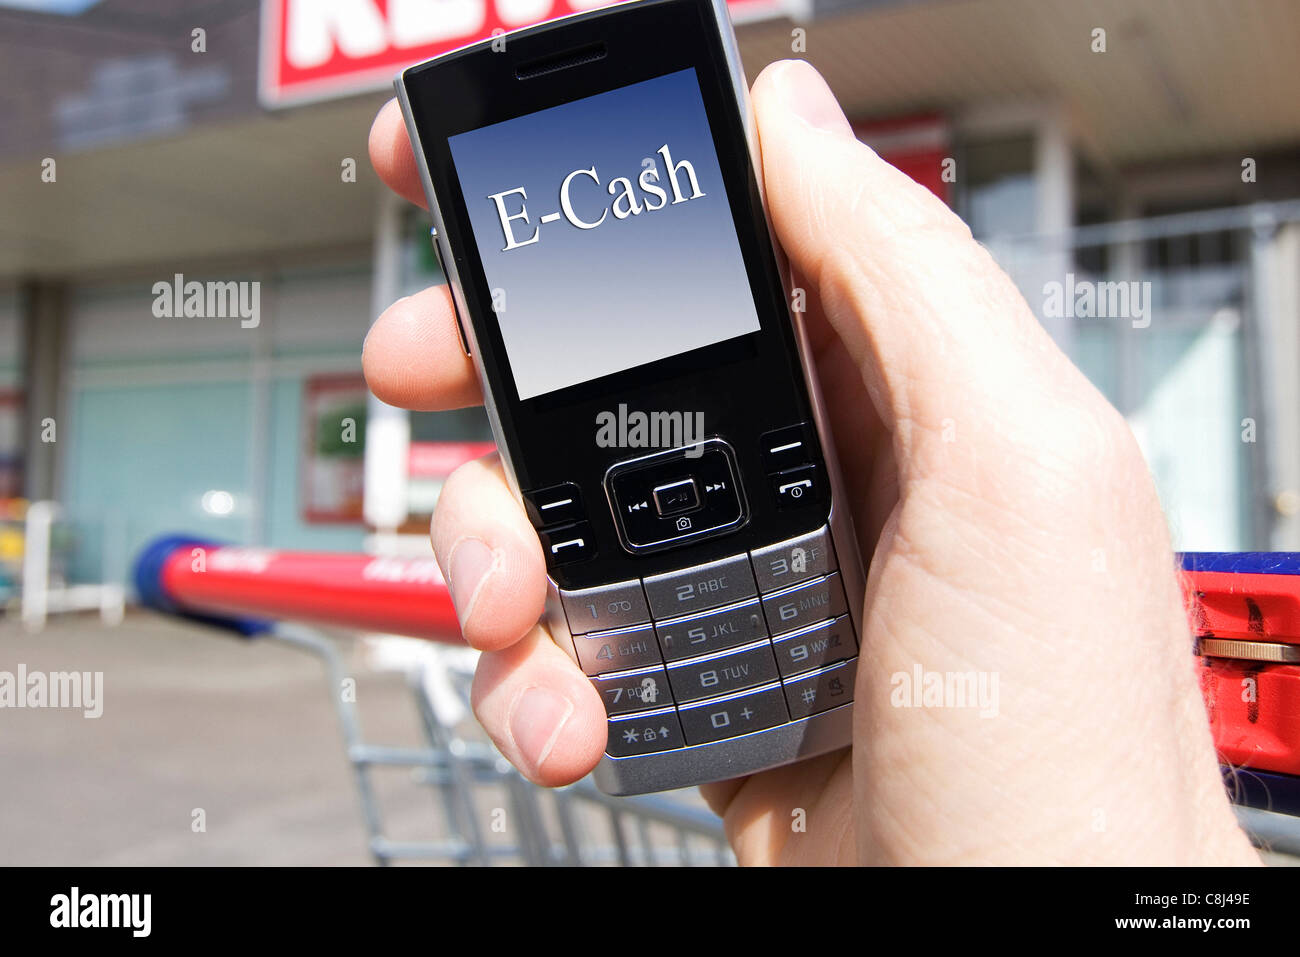 Mobile phone, buy, pay, system, NFC, technology, technics, NFC, NFC technology, number system, pay, mobile phone, payment, Ecash Stock Photo